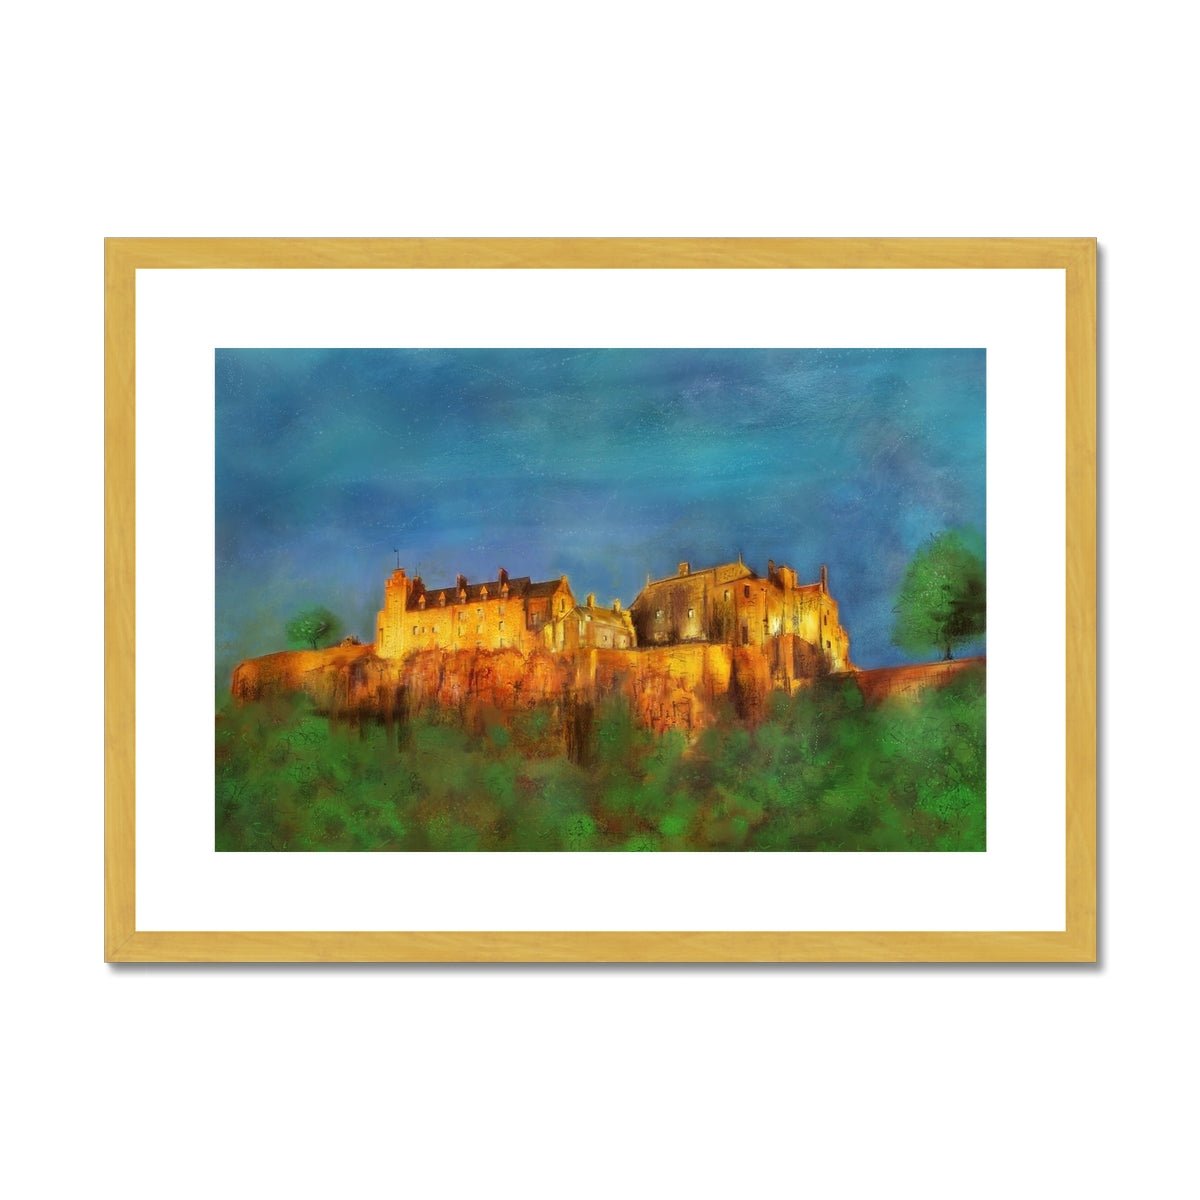 Stirling Castle Painting | Antique Framed & Mounted Prints From Scotland-Antique Framed & Mounted Prints-Historic & Iconic Scotland Art Gallery-A2 Landscape-Gold Frame-Paintings, Prints, Homeware, Art Gifts From Scotland By Scottish Artist Kevin Hunter